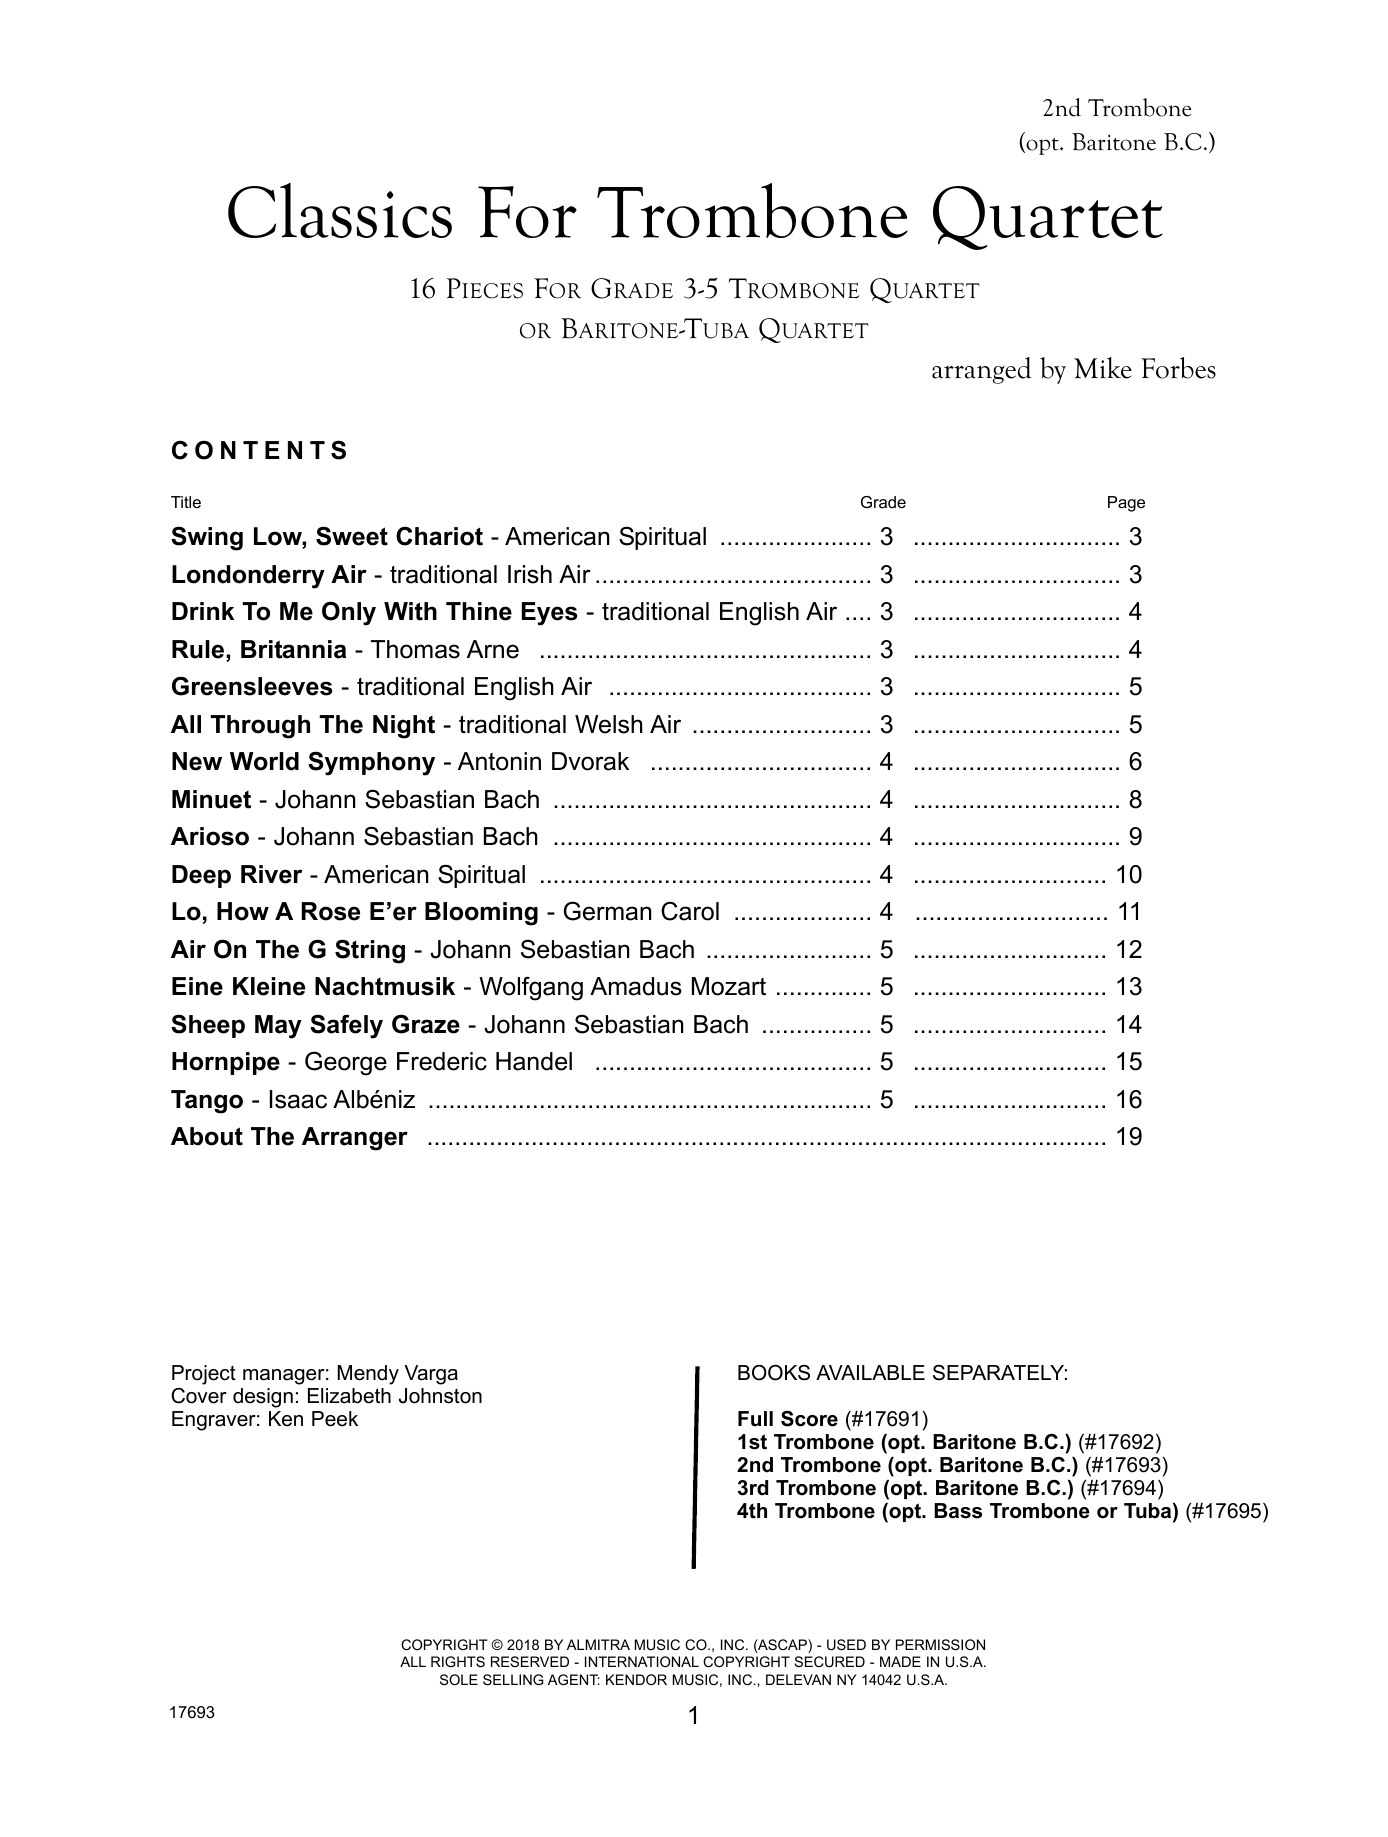 Download Mike Forbes Classics For Trombone Quartet - 2nd Tro Sheet Music